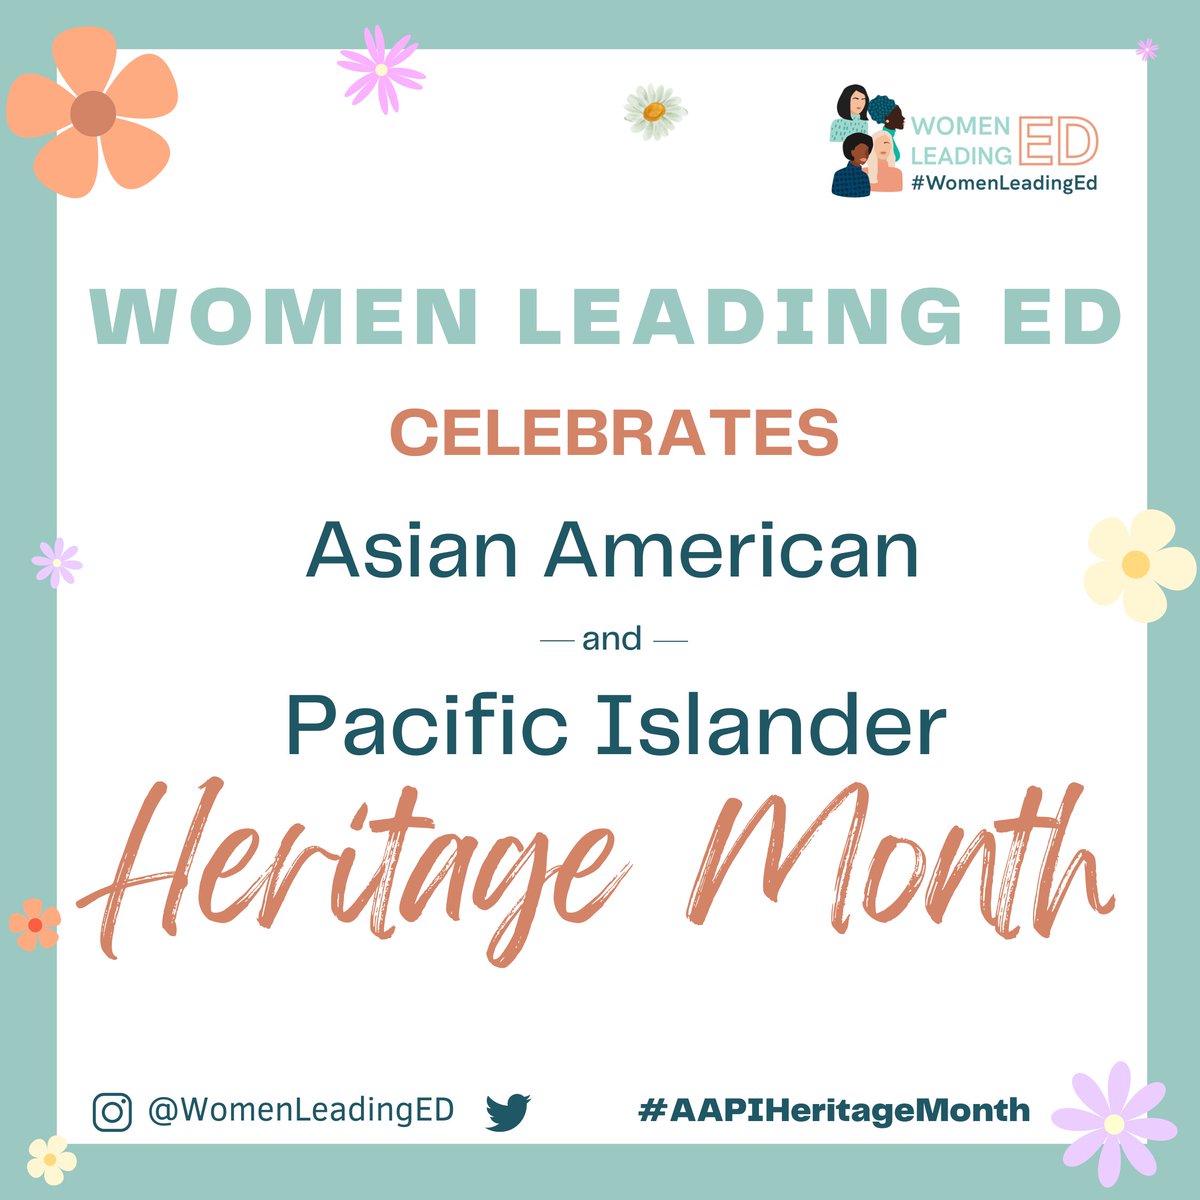 Across #AAPIHeritageMonth we recognize the vital contributions of our #AAPI leaders, their work to support students, and the impact they make on communities across the country. The diverse experiences & backgrounds of AAPI educators and leaders strengthen our schools every day.